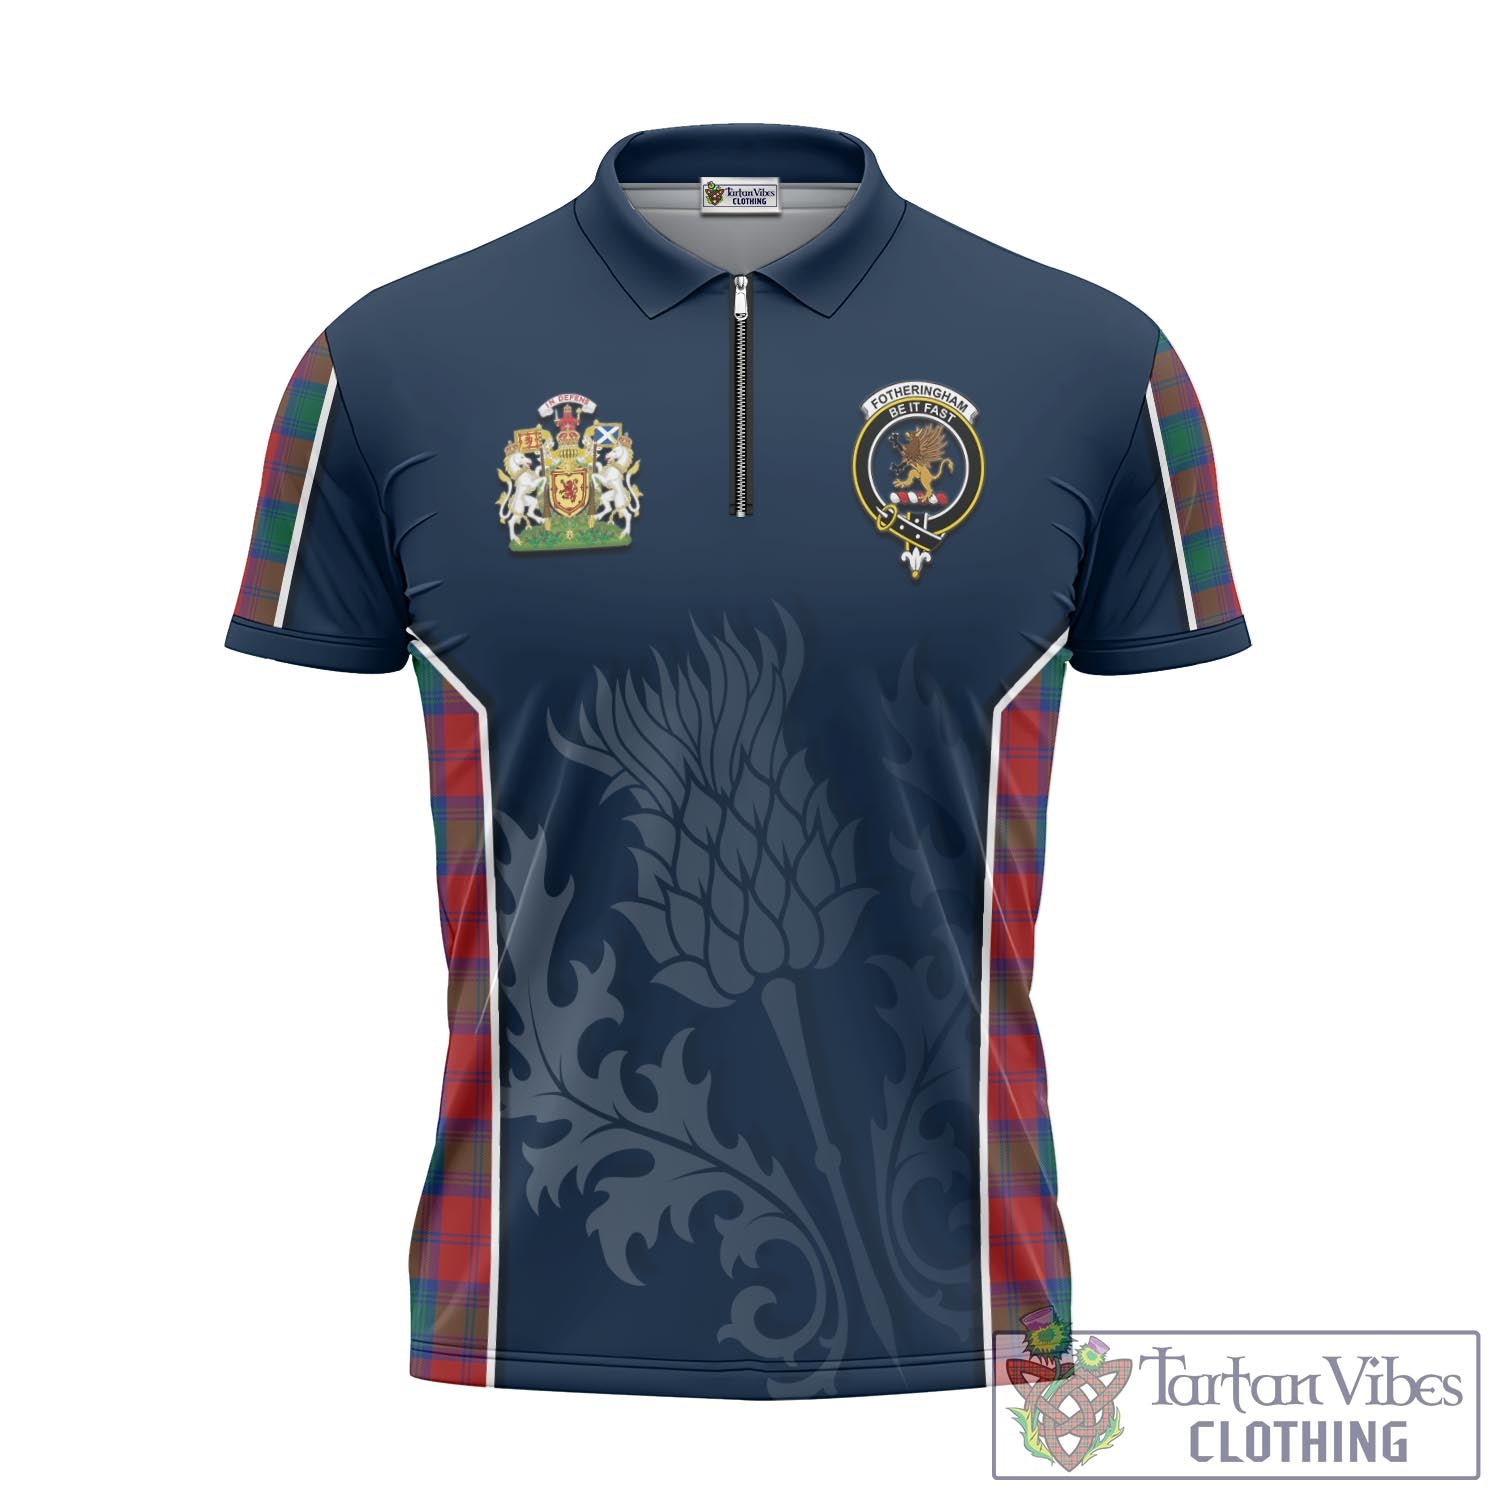 Tartan Vibes Clothing Fotheringham Modern Tartan Zipper Polo Shirt with Family Crest and Scottish Thistle Vibes Sport Style